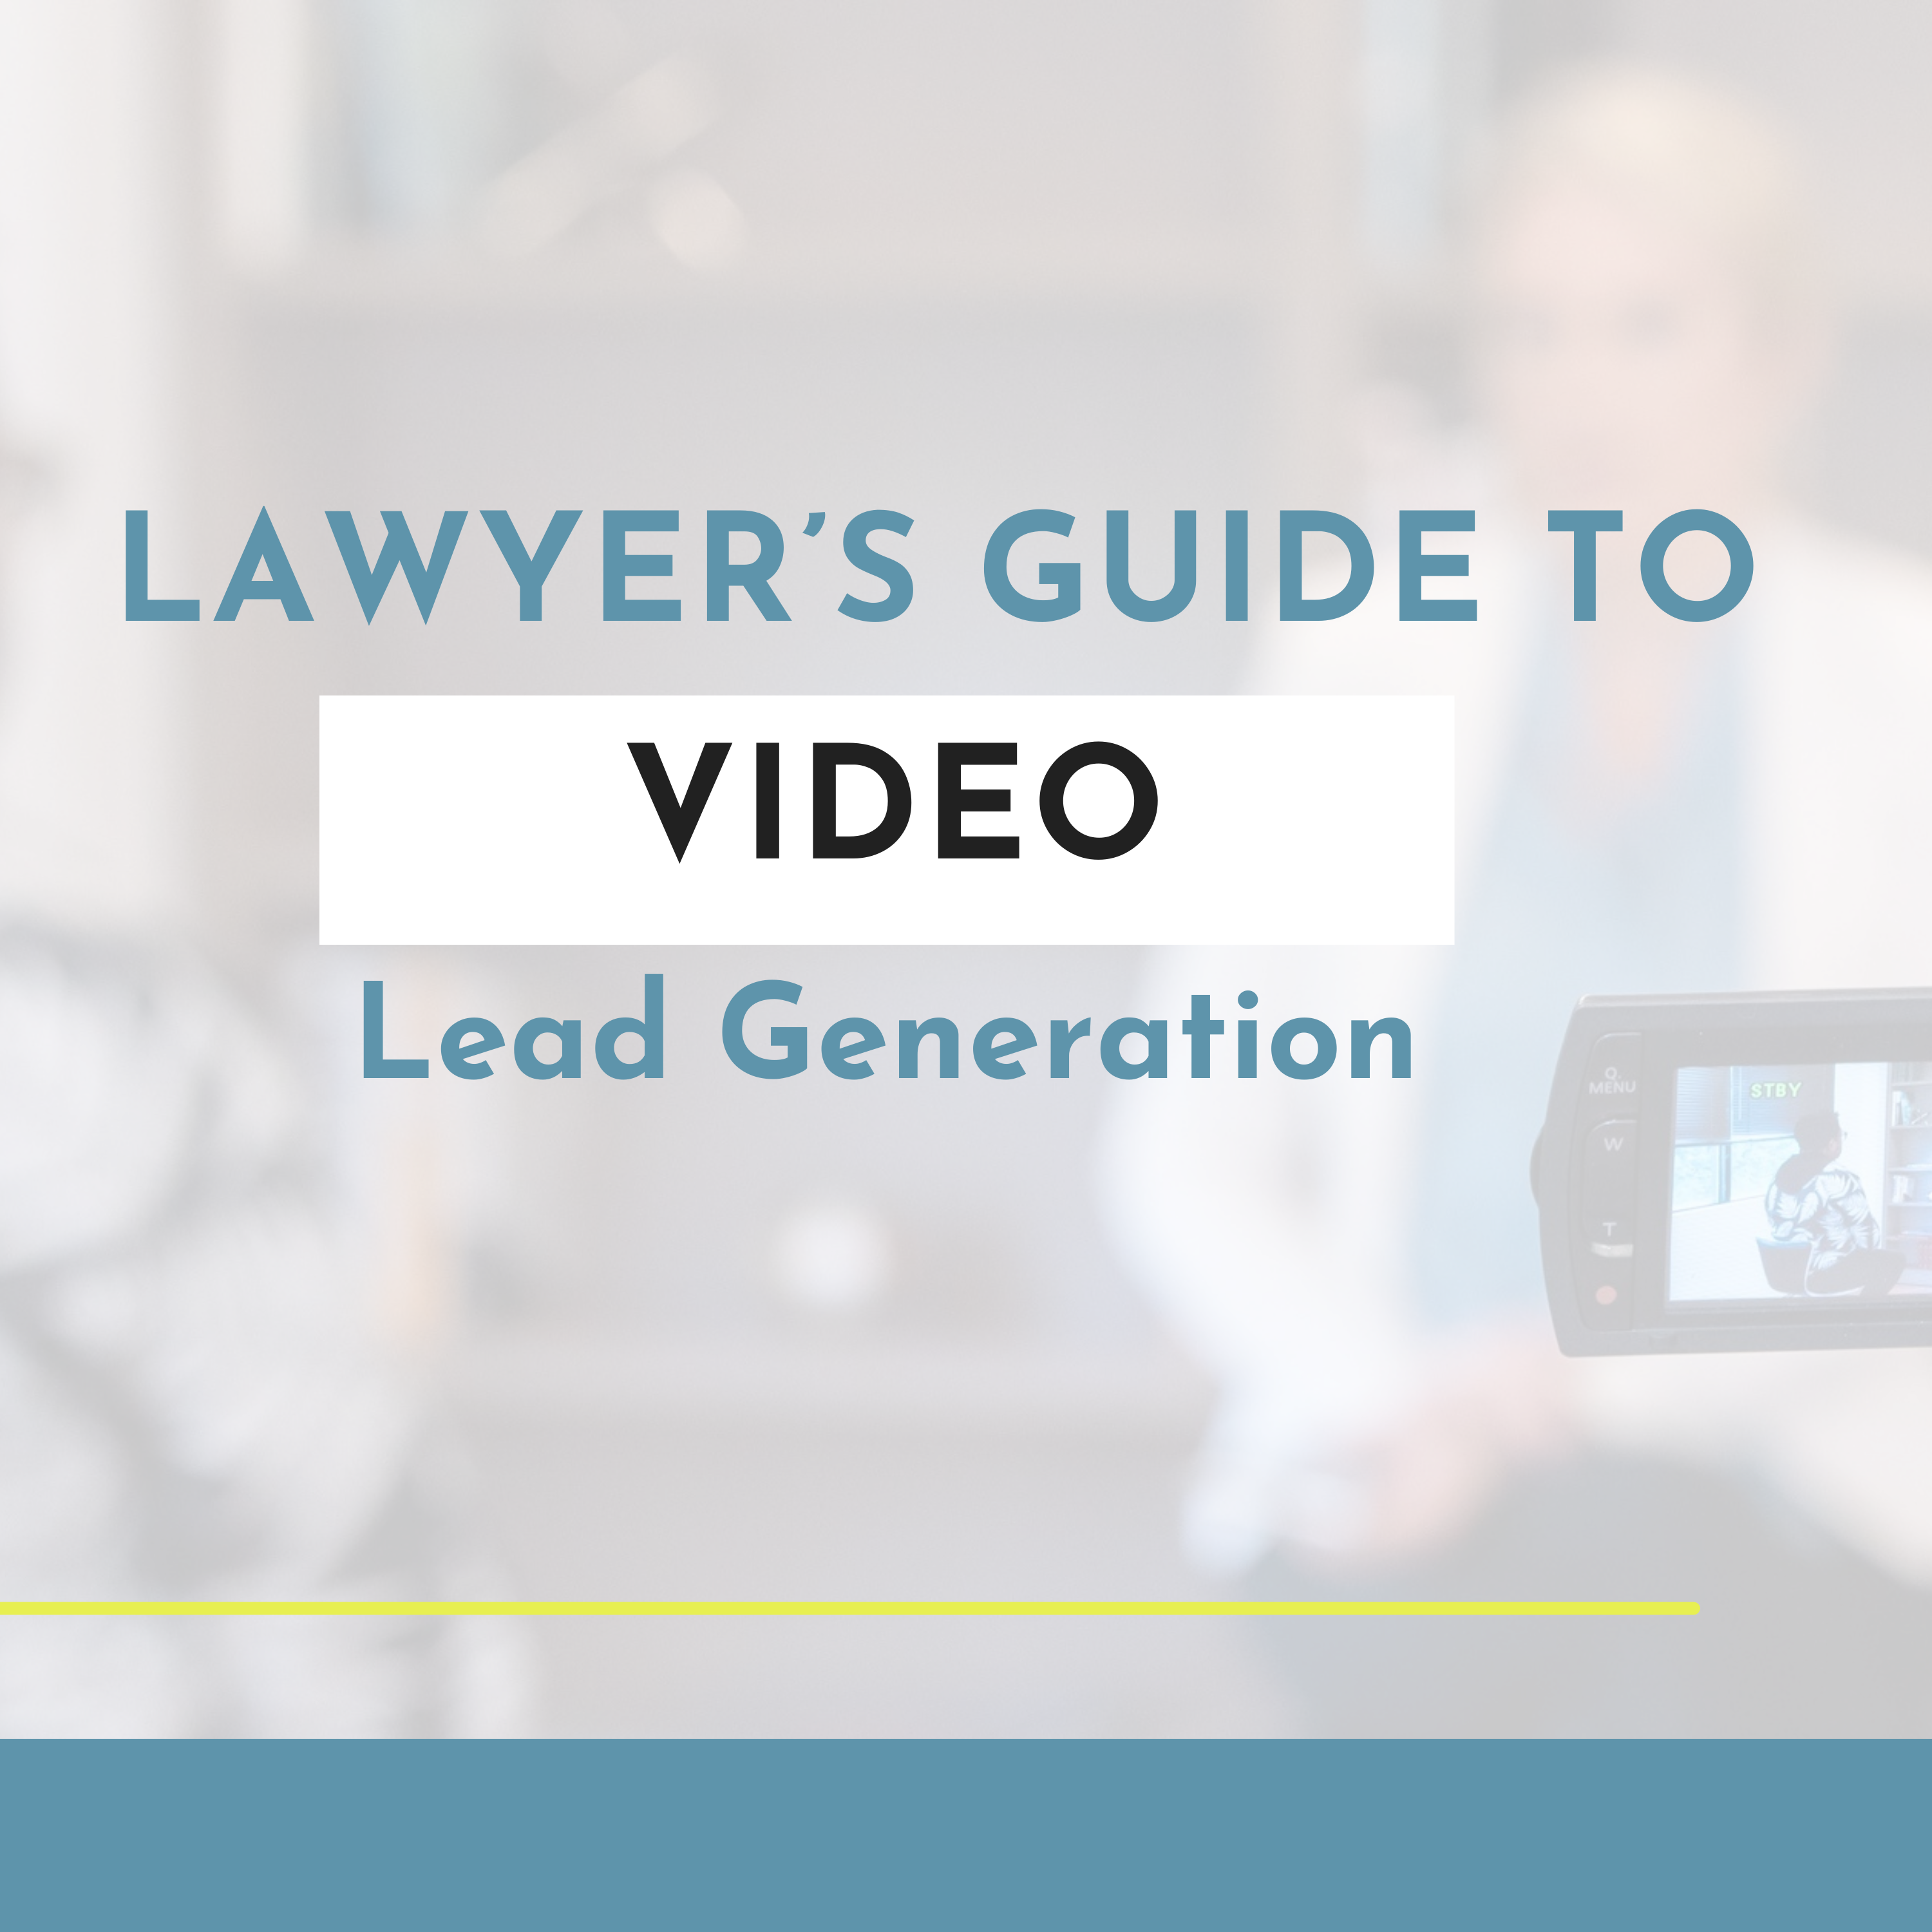 The Lawyer's Guide to Video Lead Generation